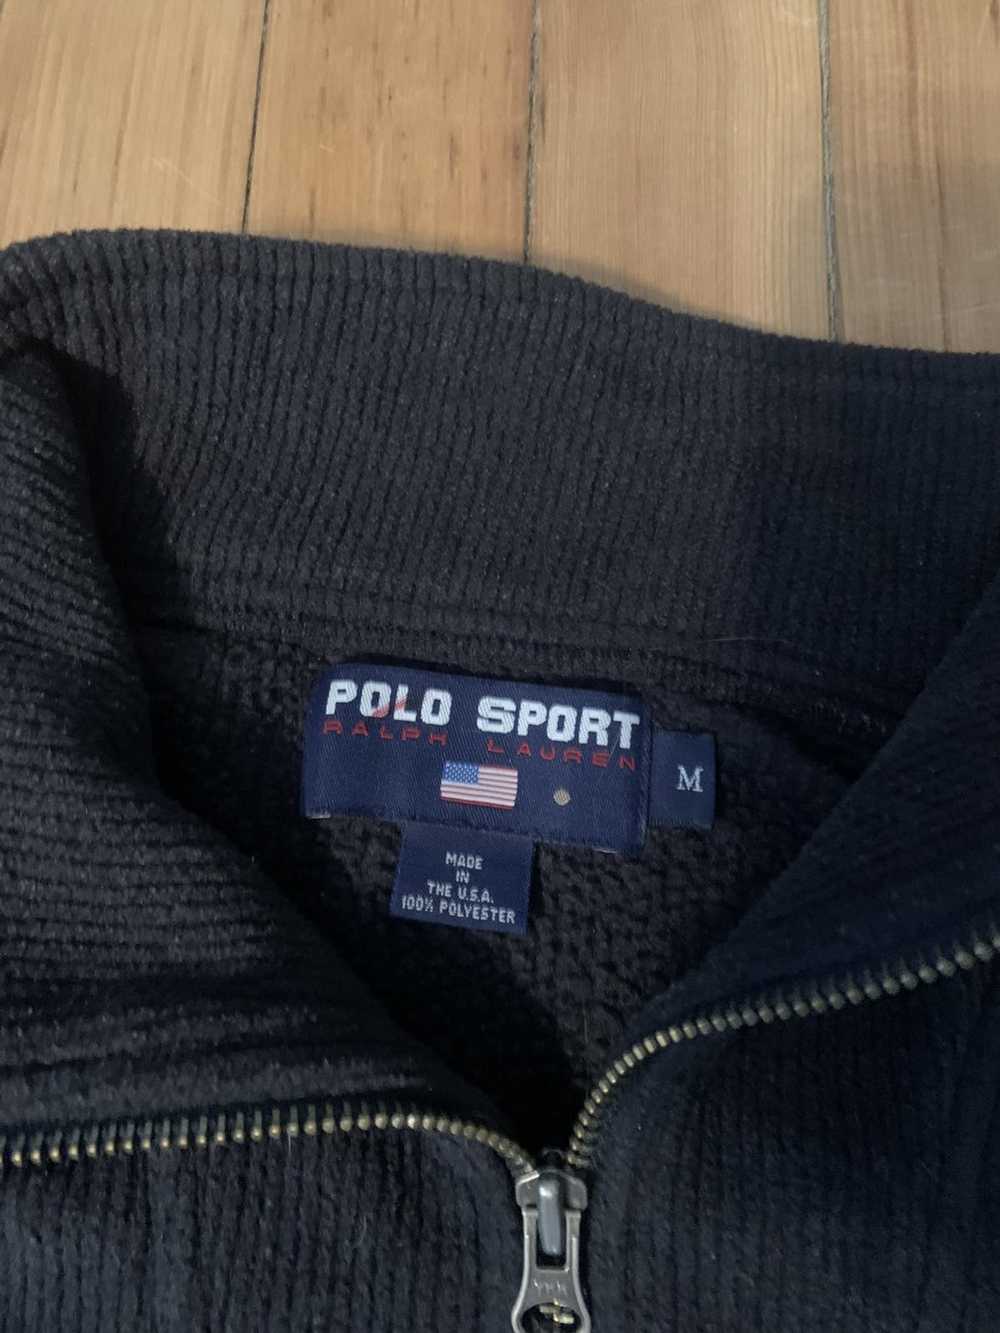 Made In Usa × Polo Ralph Lauren × Vintage Rare Po… - image 4